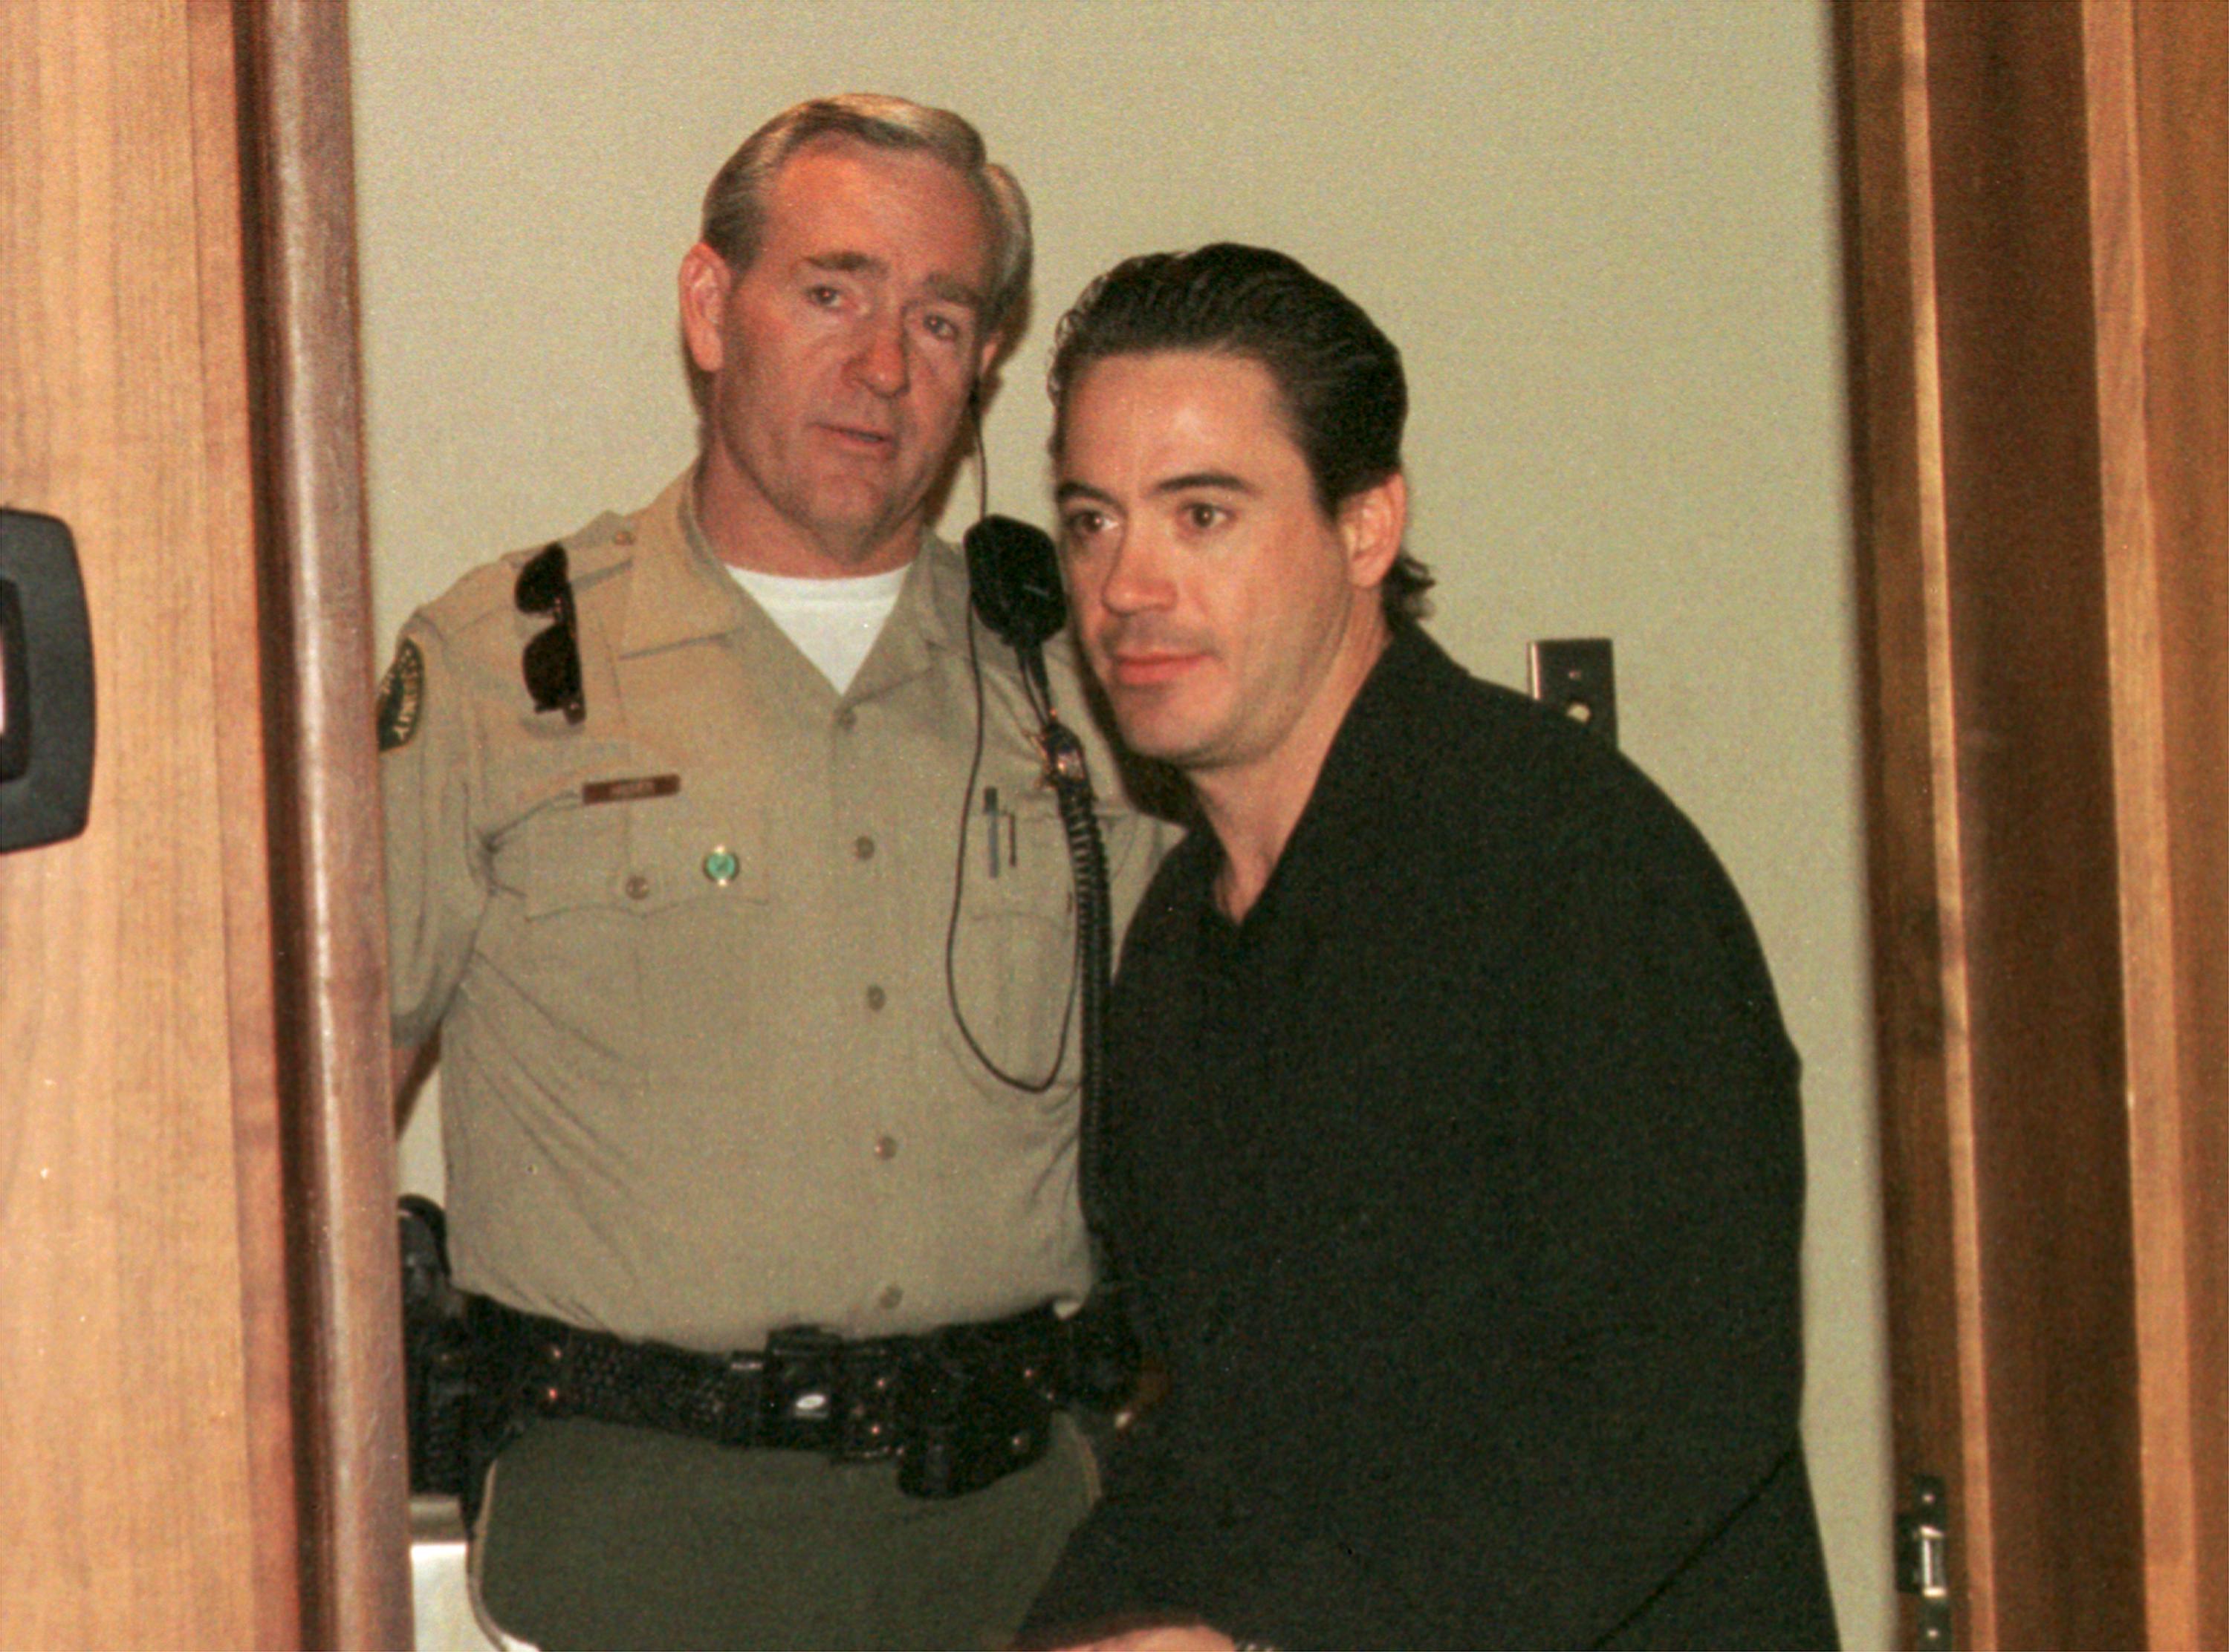 Robert Downey Jr. appearing in court on December 27, 2000 in Indo, California | Source: Getty Images